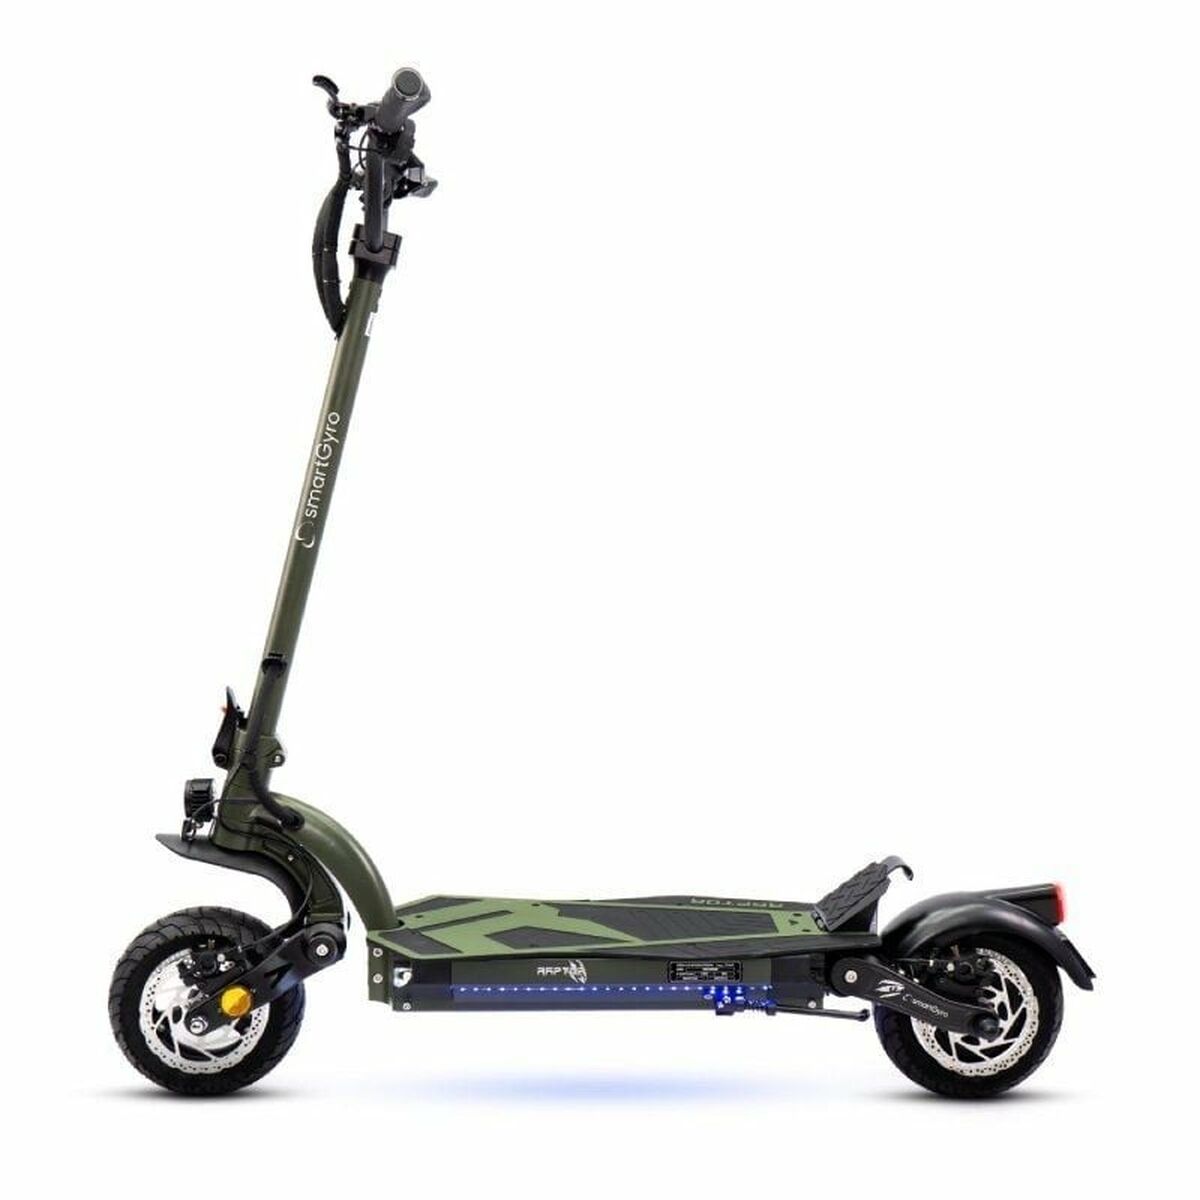 Electric Scooter Smartgyro SG27-430 25 km/h, Smartgyro, Sports and outdoors, Urban mobility, electric-scooter-smartgyro-sg27-430-25-km-h, Brand_Smartgyro, category-reference-2609, category-reference-2629, category-reference-2904, category-reference-t-19681, category-reference-t-19756, category-reference-t-19876, category-reference-t-21245, category-reference-t-25387, Condition_NEW, deportista / en forma, Price_+ 1000, RiotNook